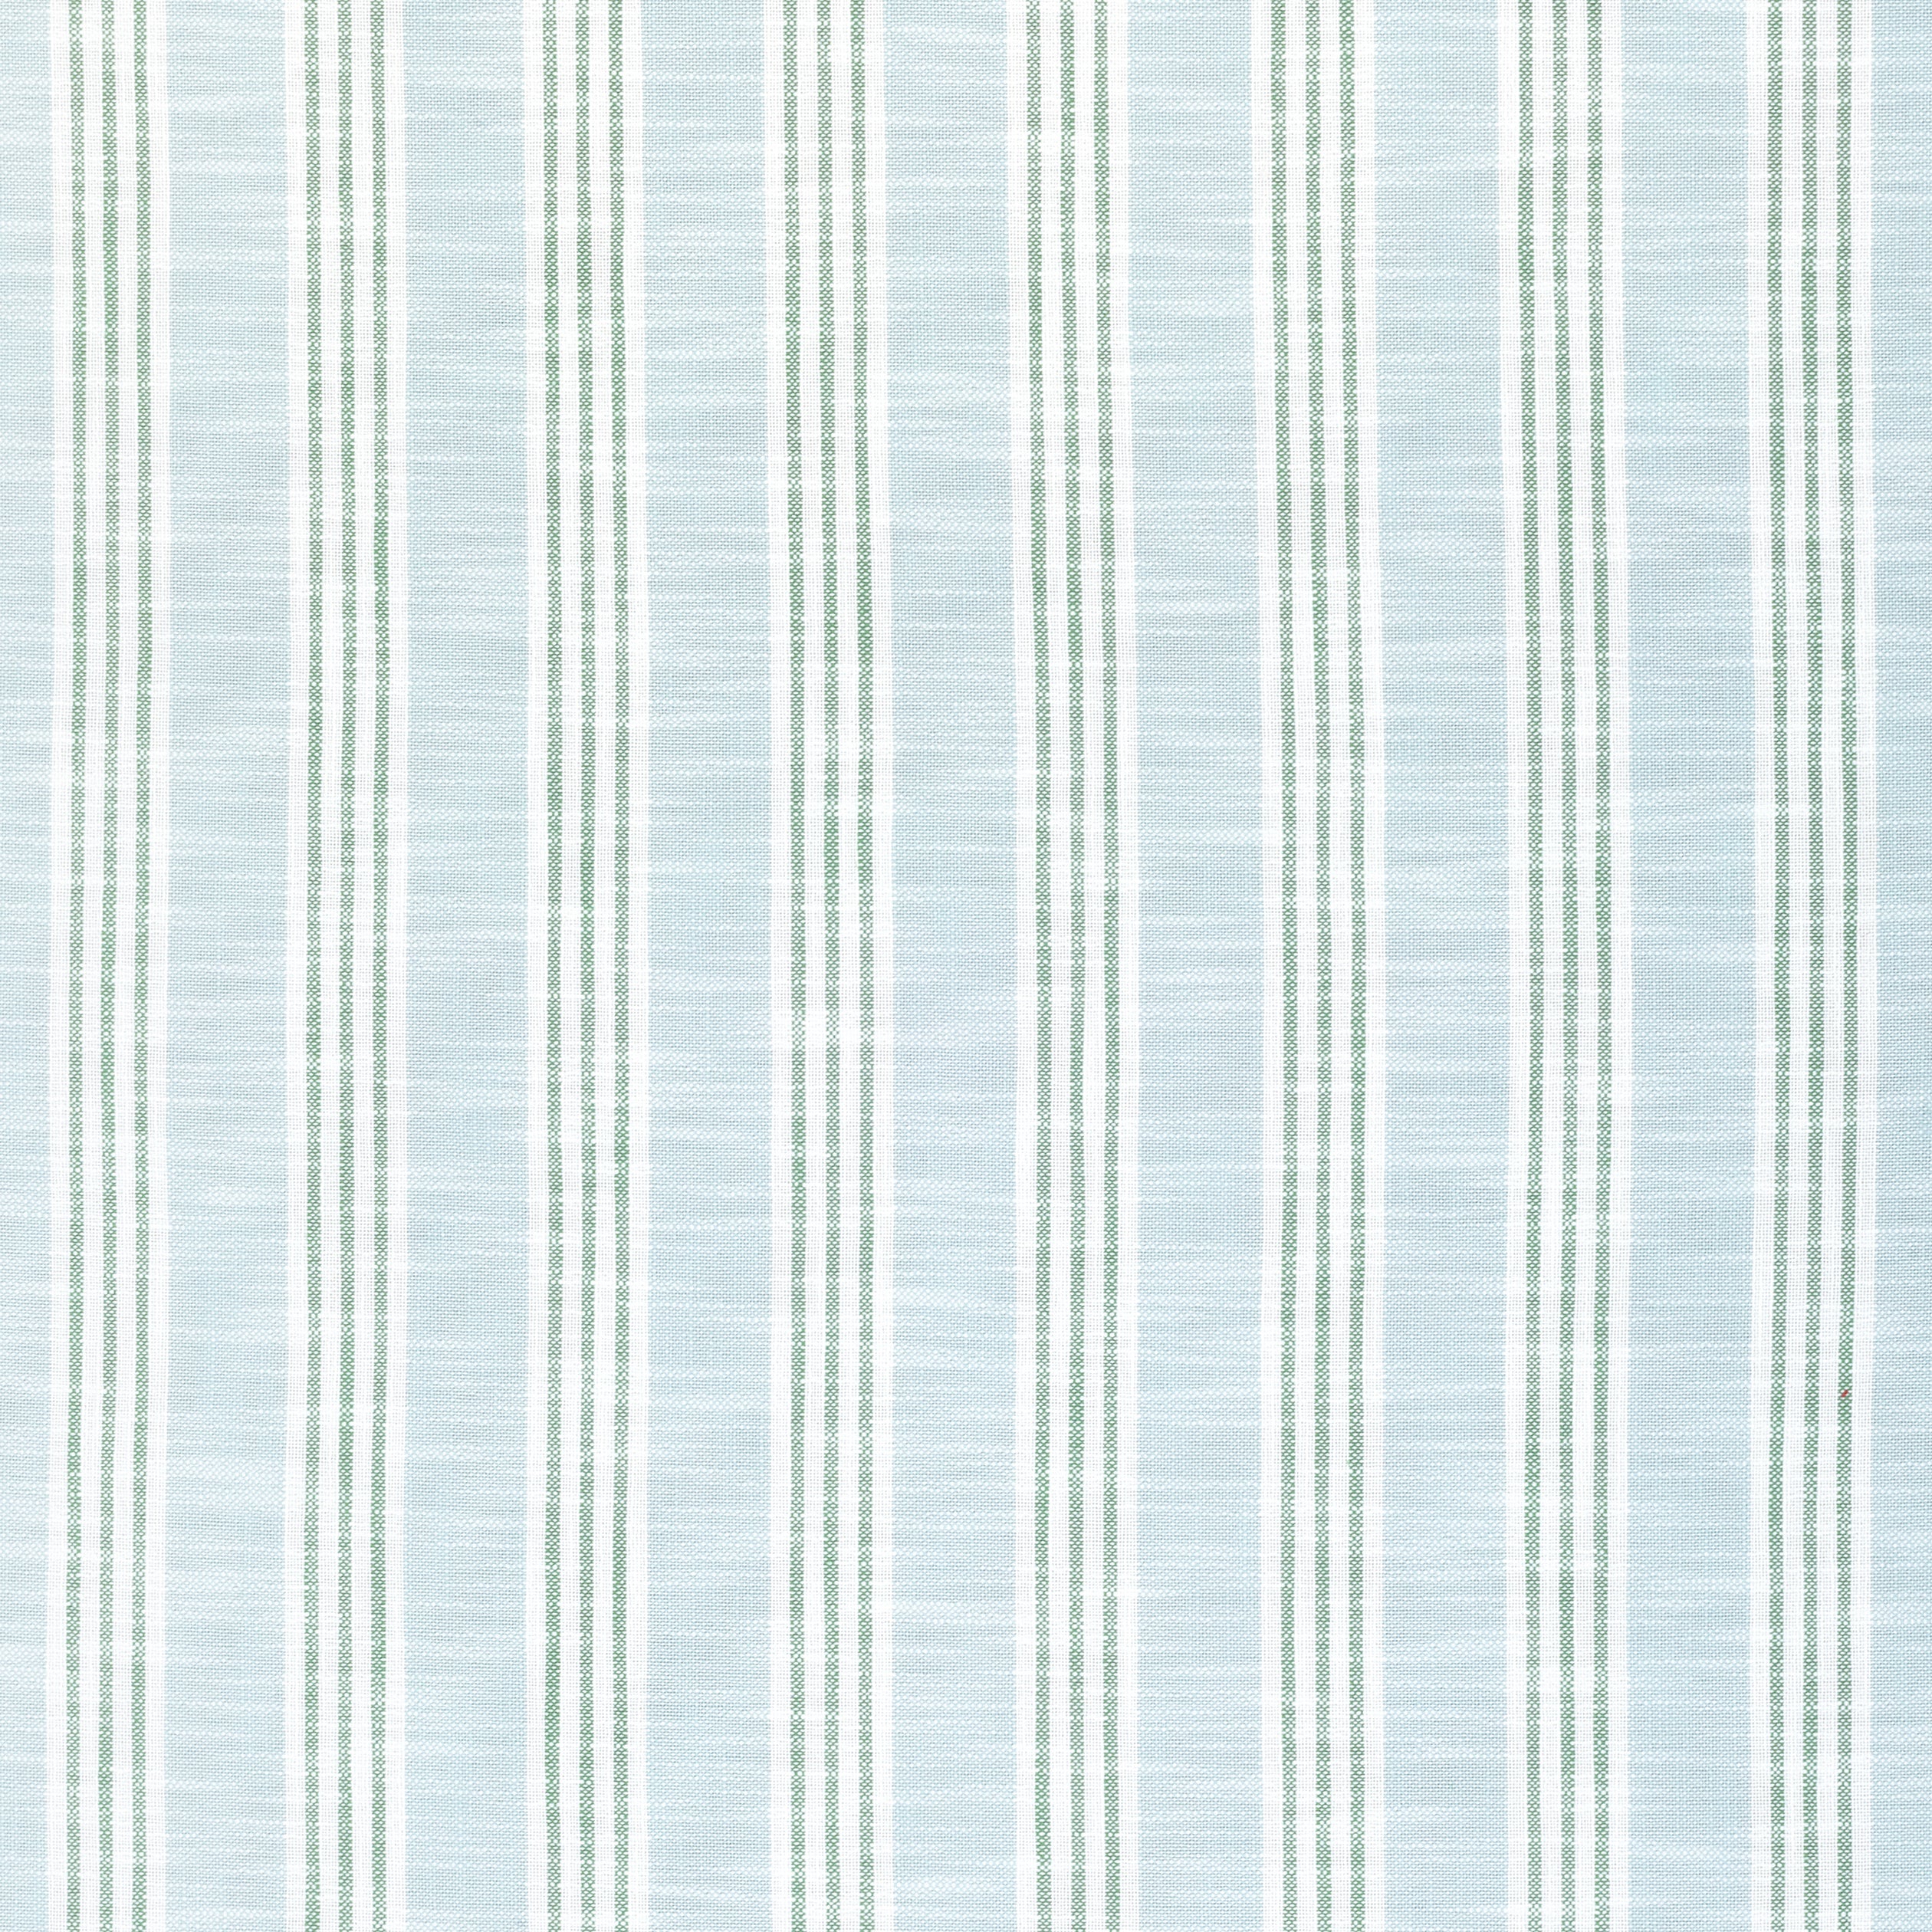 Southport Stripe fabric in seafoam and kelly green color - pattern number W73485 - by Thibaut in the Landmark collection